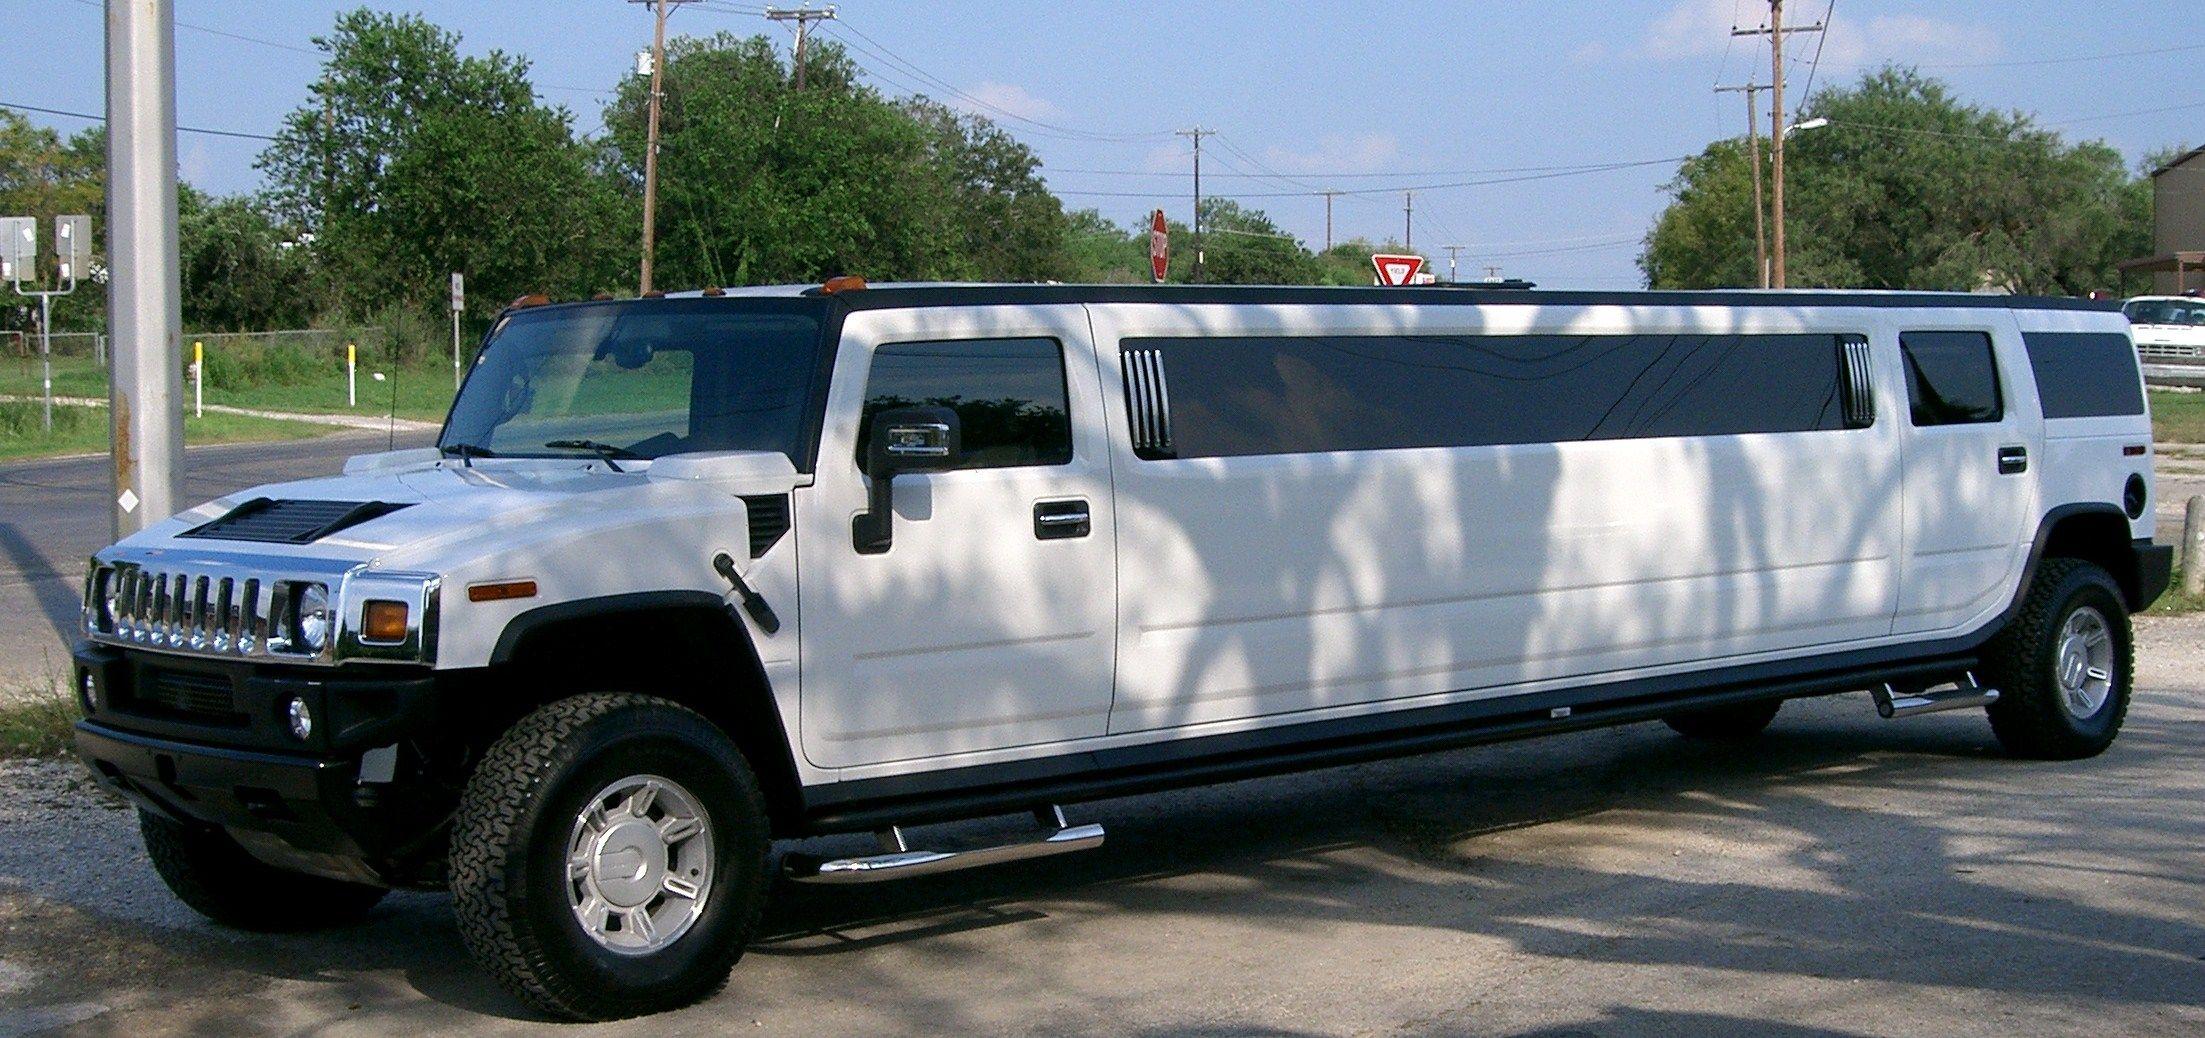 Hummer Limo I just found out this type of incredible limousine